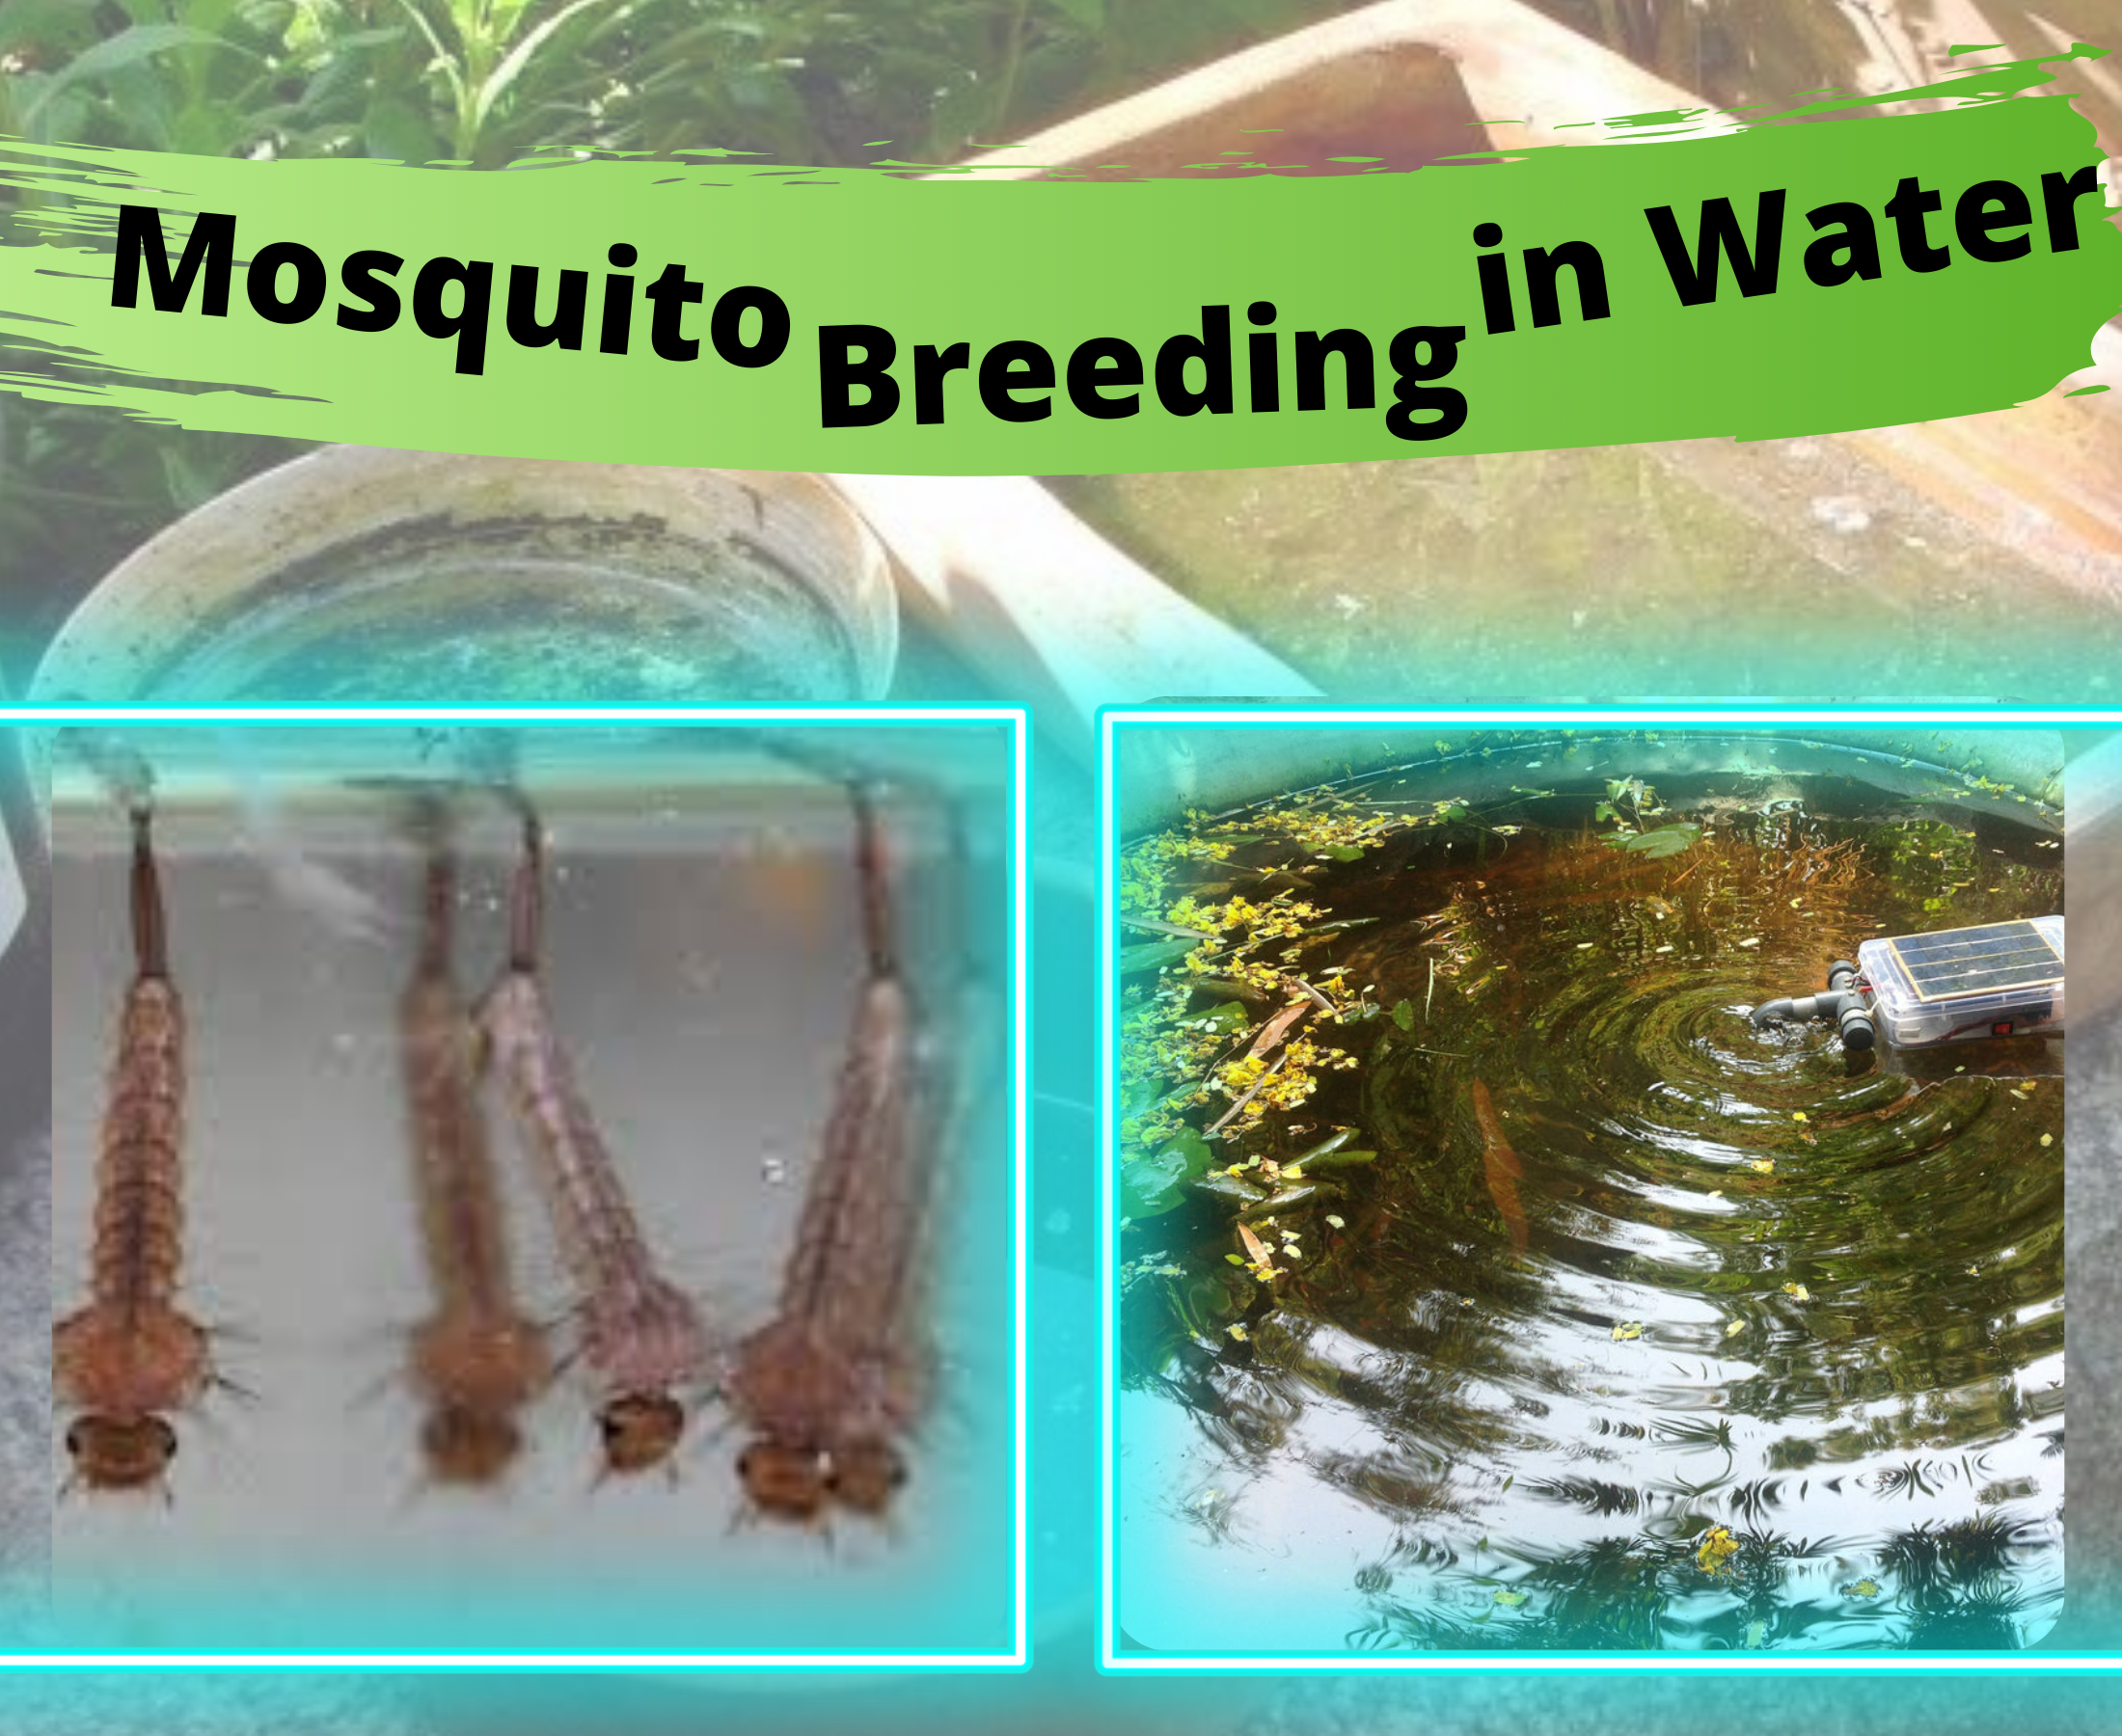 How to control mosquito breeding in a water tank?